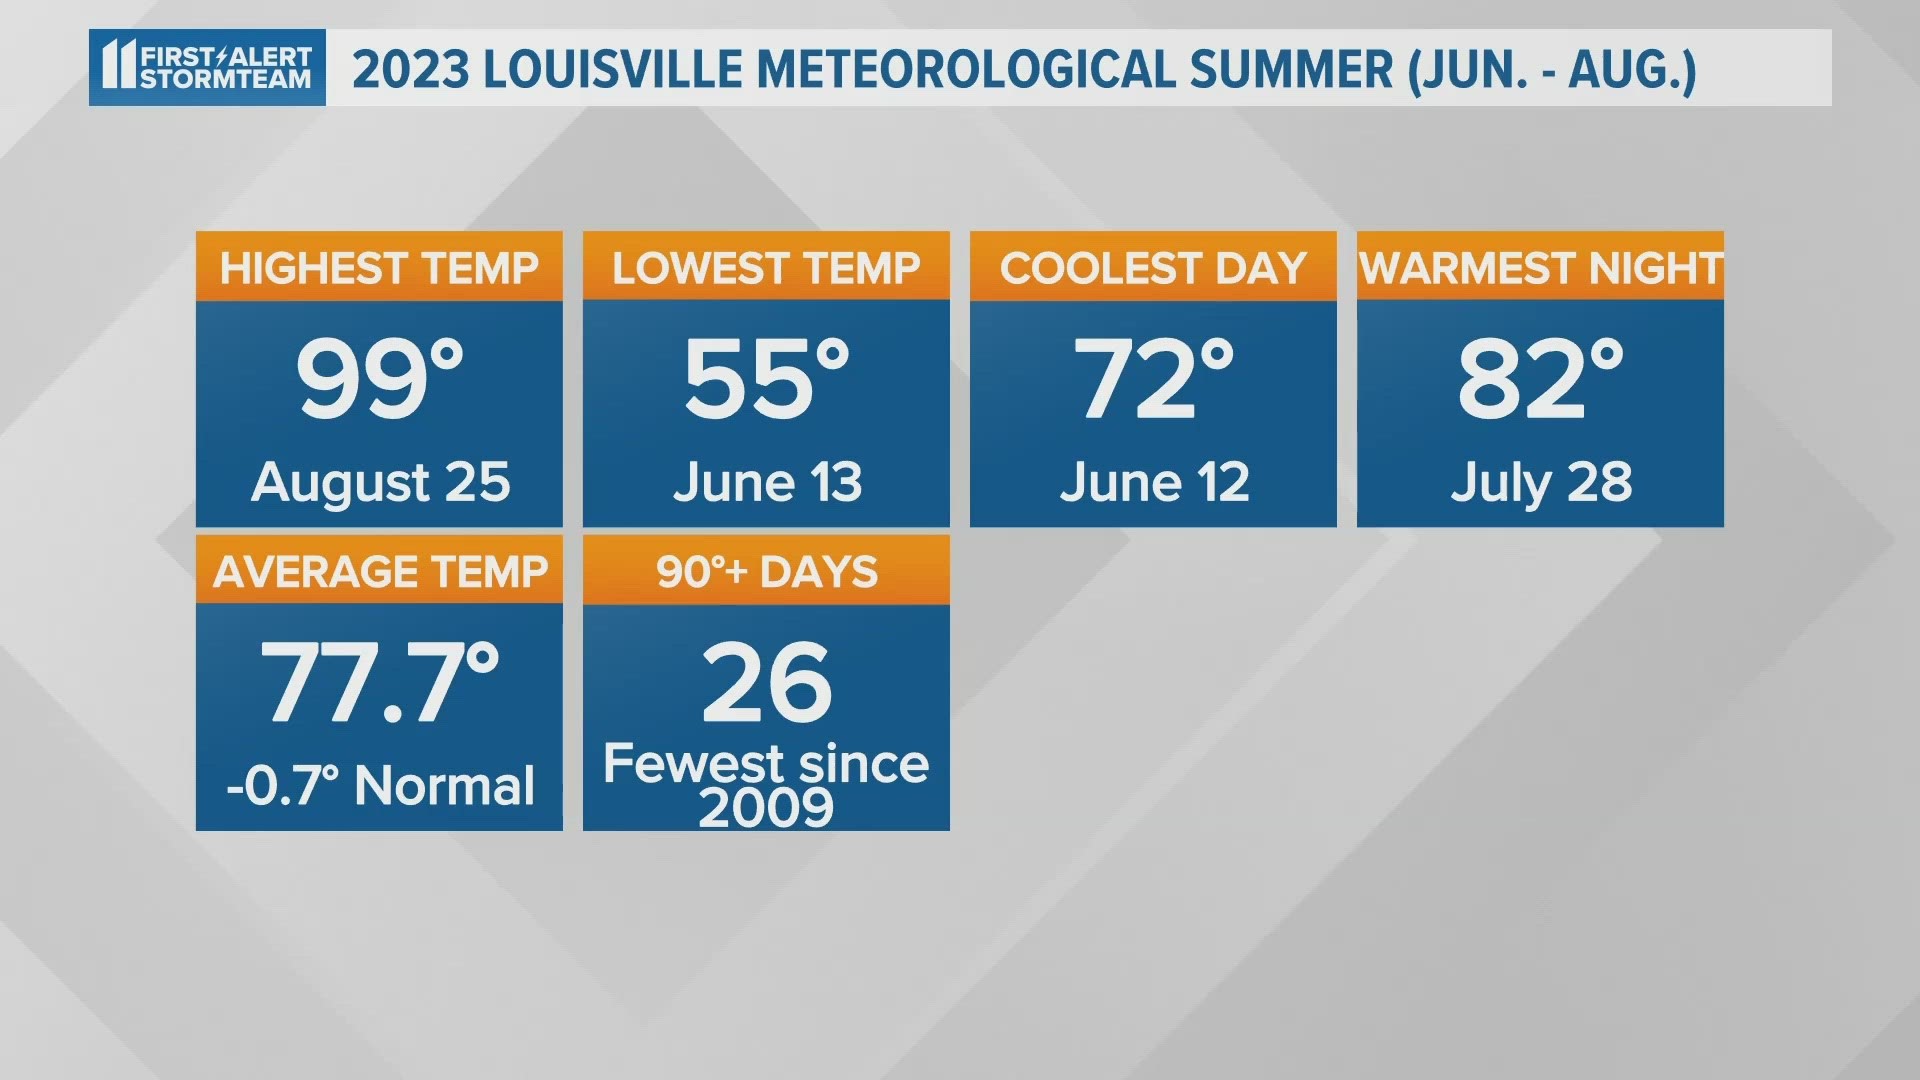 WHAS11 Meteorologist Alden German looked back at the hottest and coolest days of the summer.